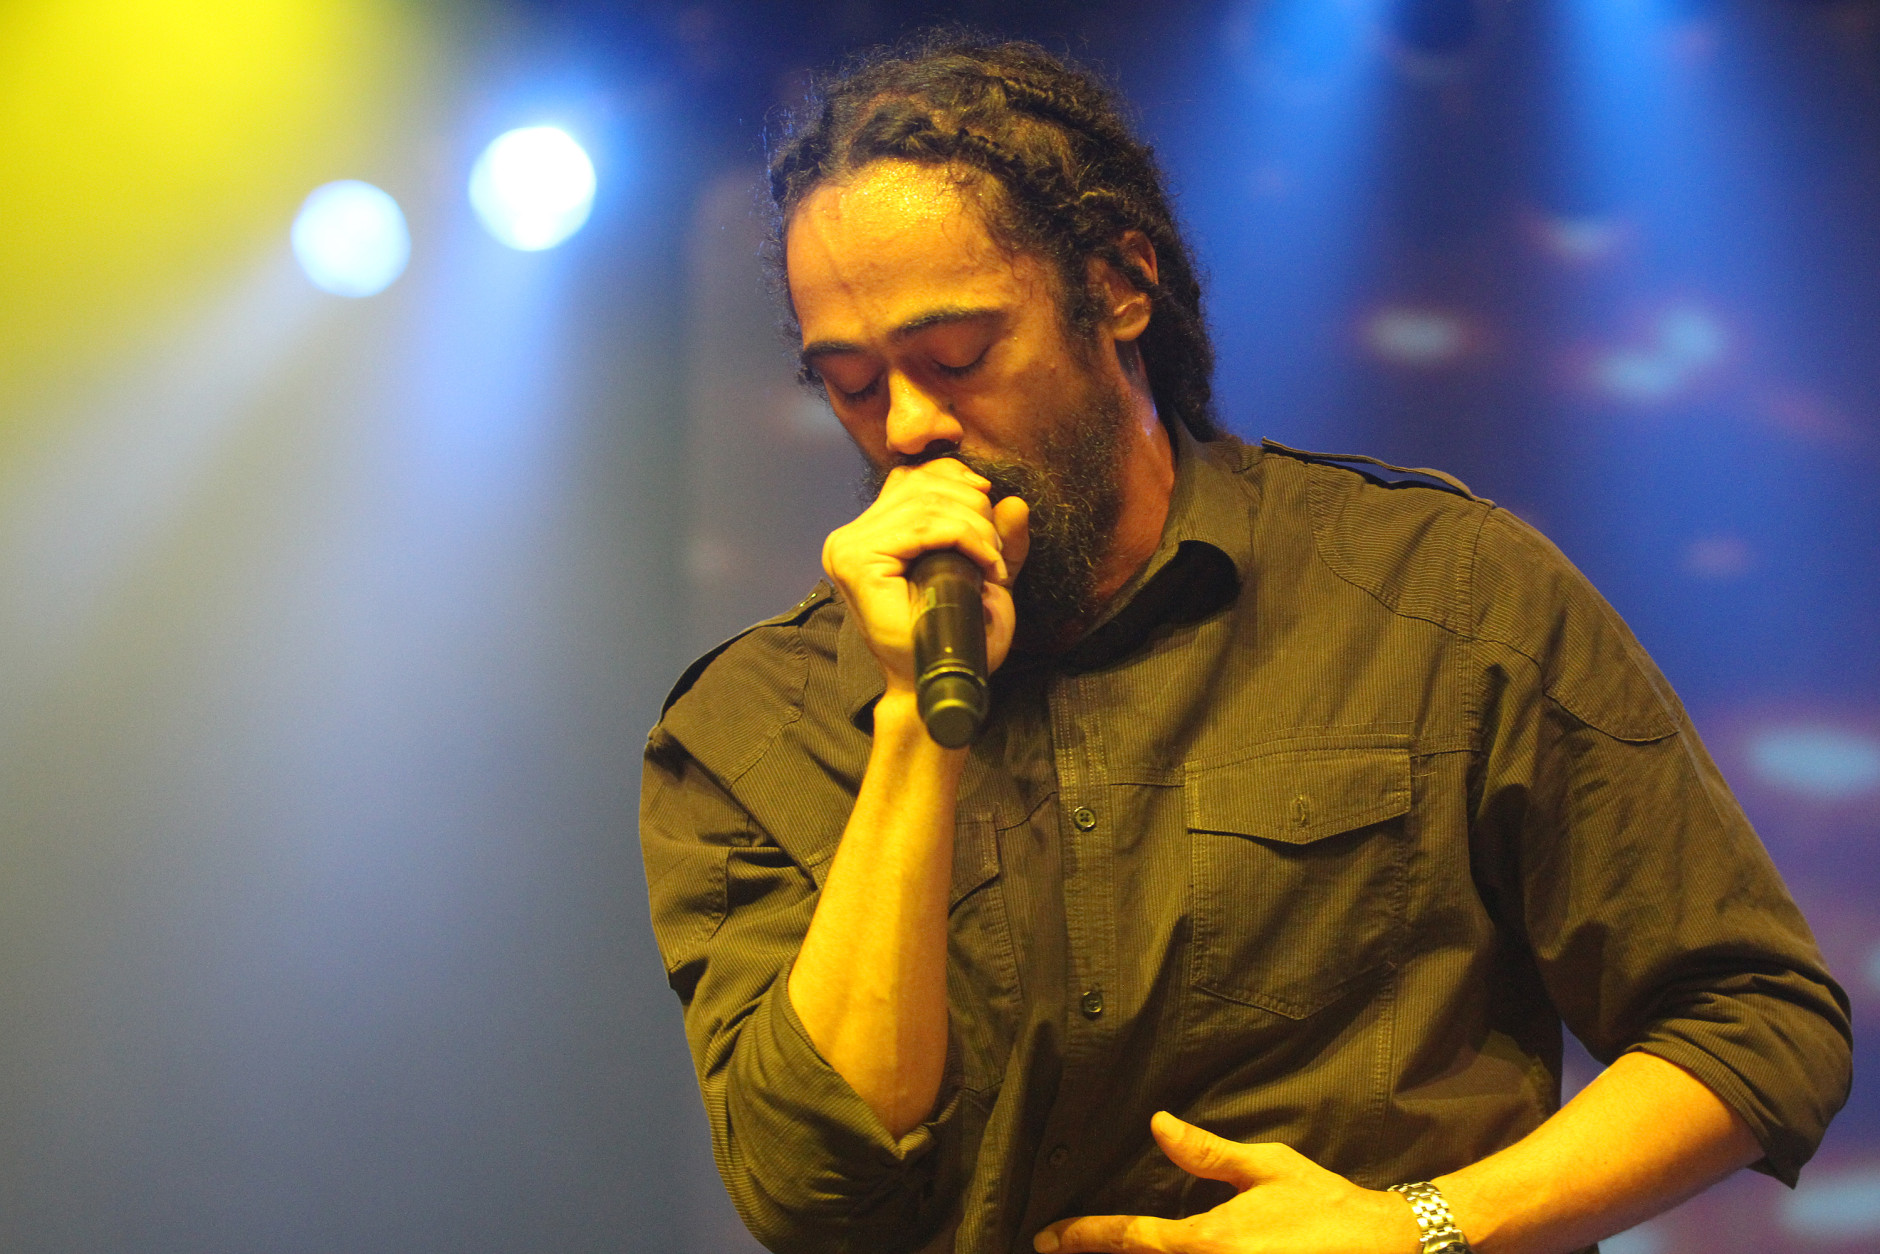 Damian Marley performs during the "Catch A Fire Tour 2015" stop at The Paramount in Huntington, Long Island on Tuesday, Sept. 1, 2015, in New York. (Photo by Donald Traill/Invision/AP)